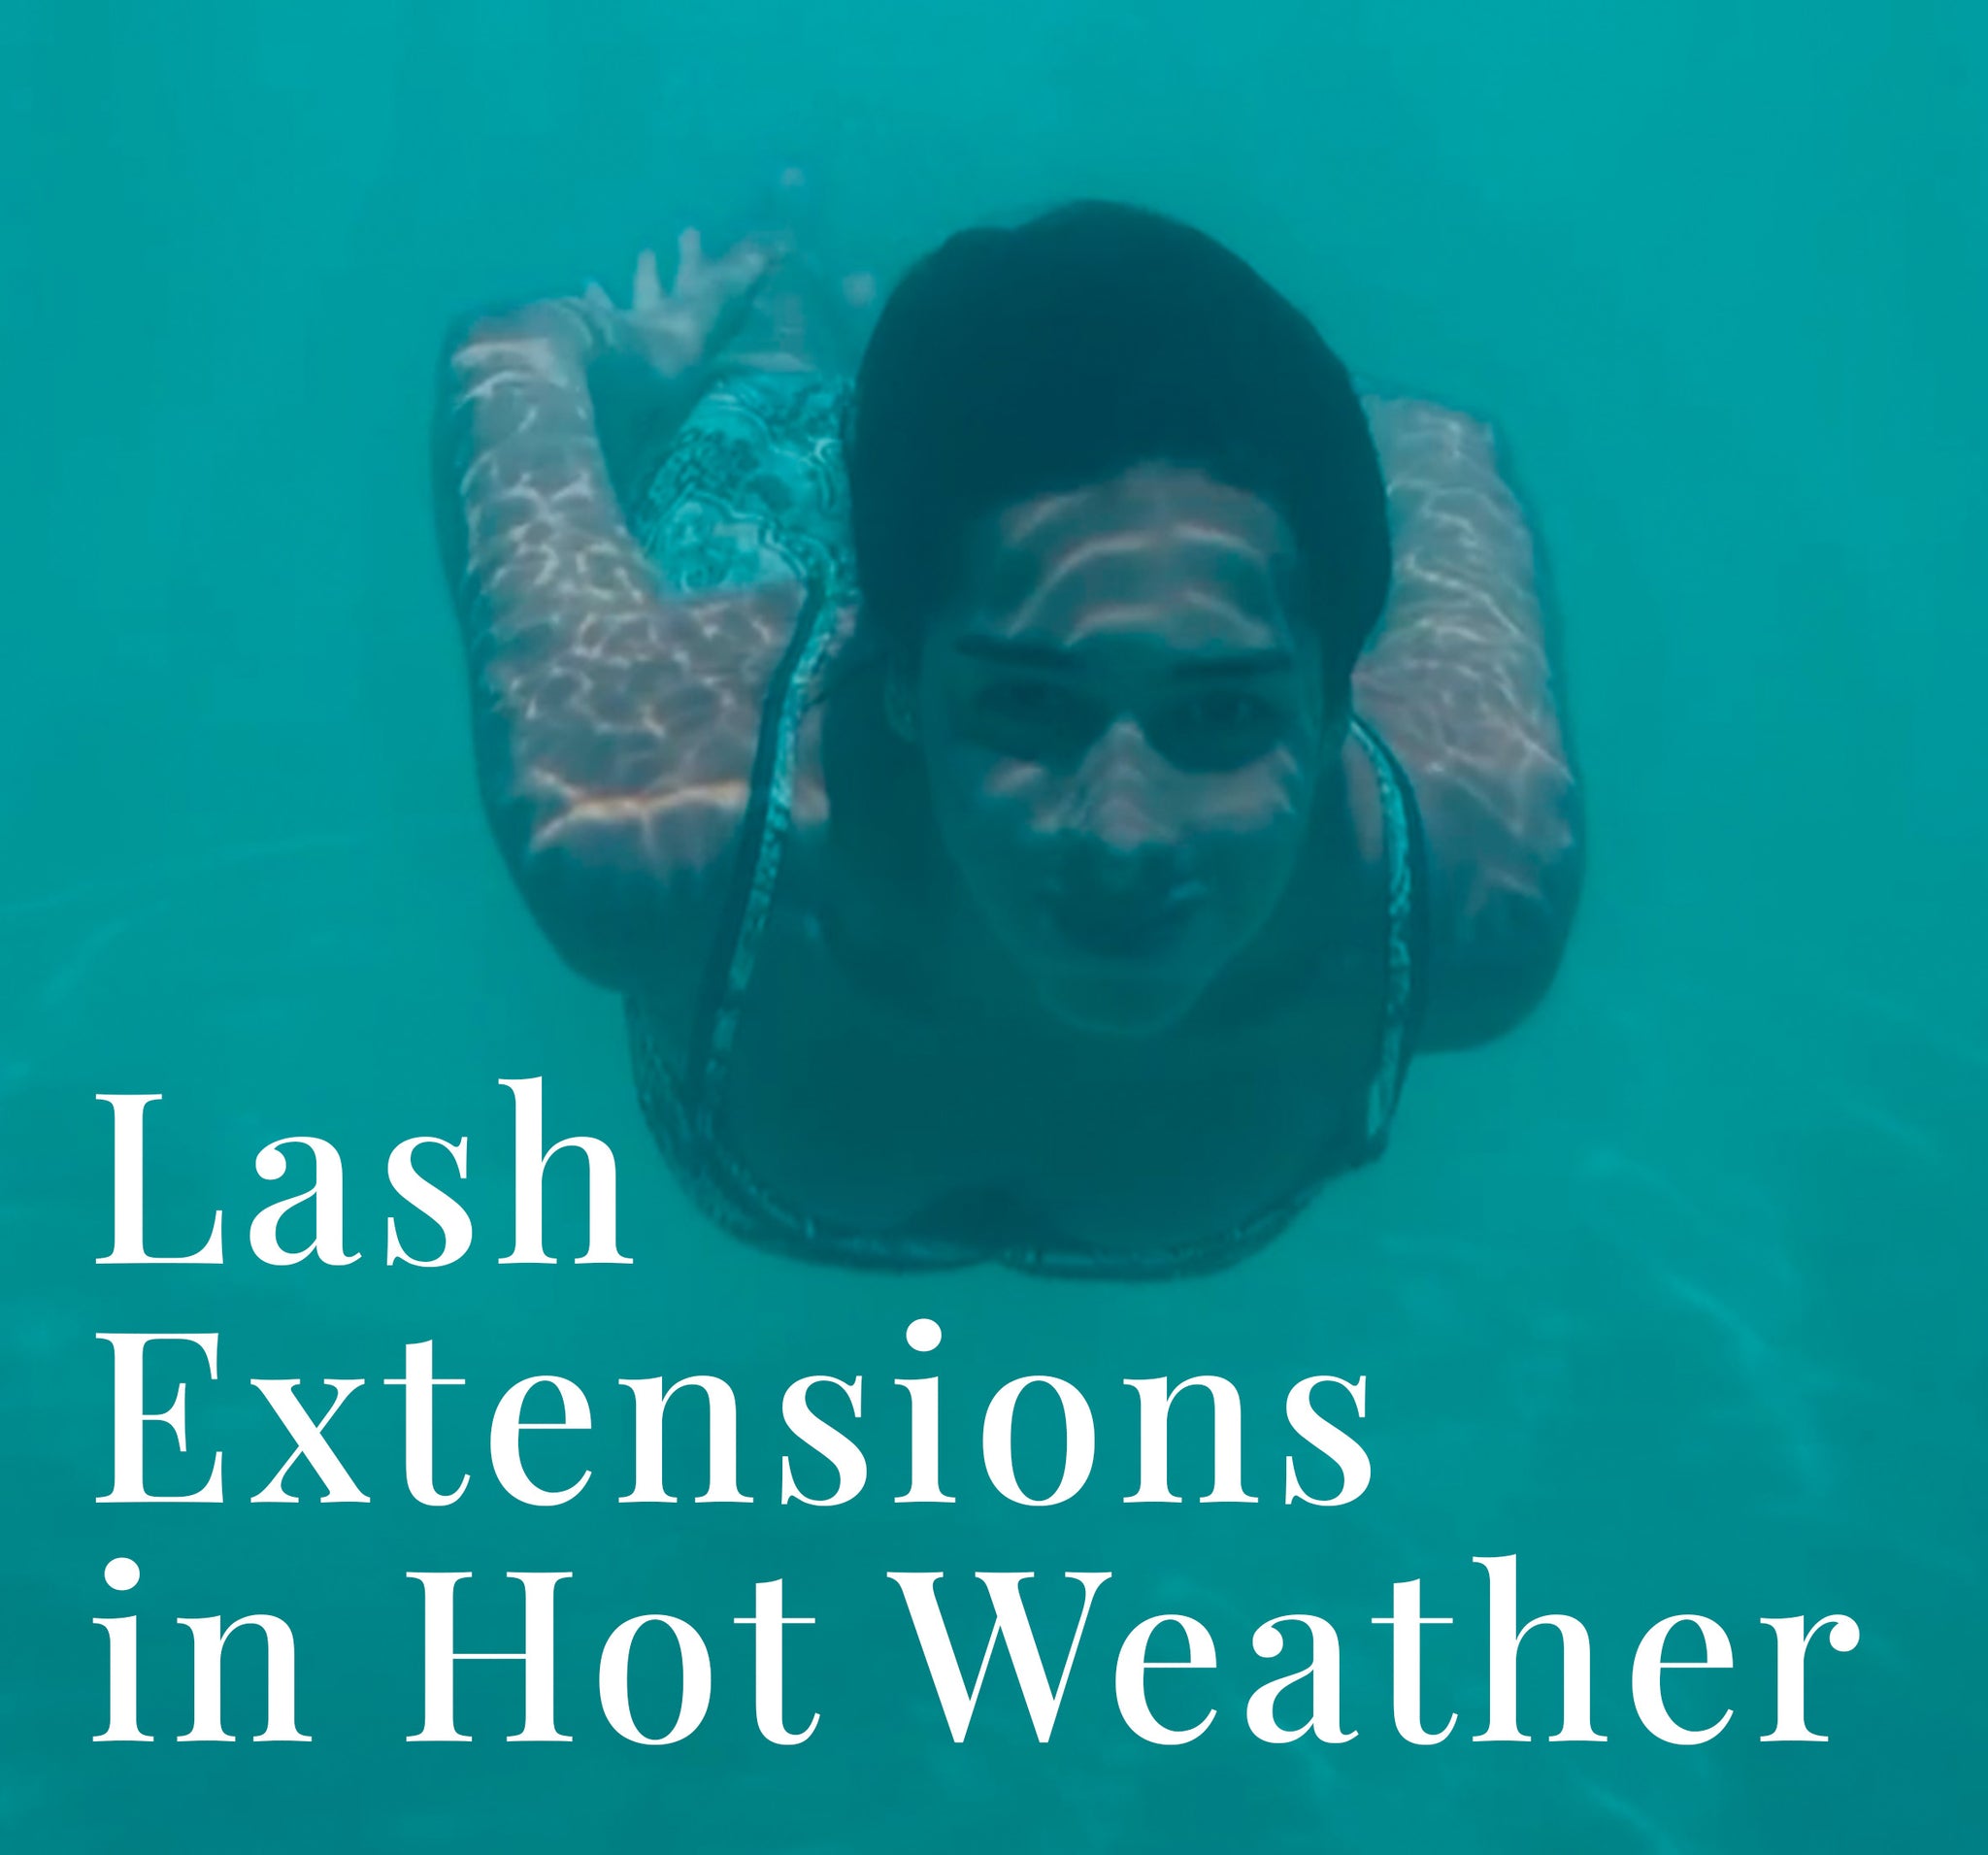 Lash Extensions in Hot Weather